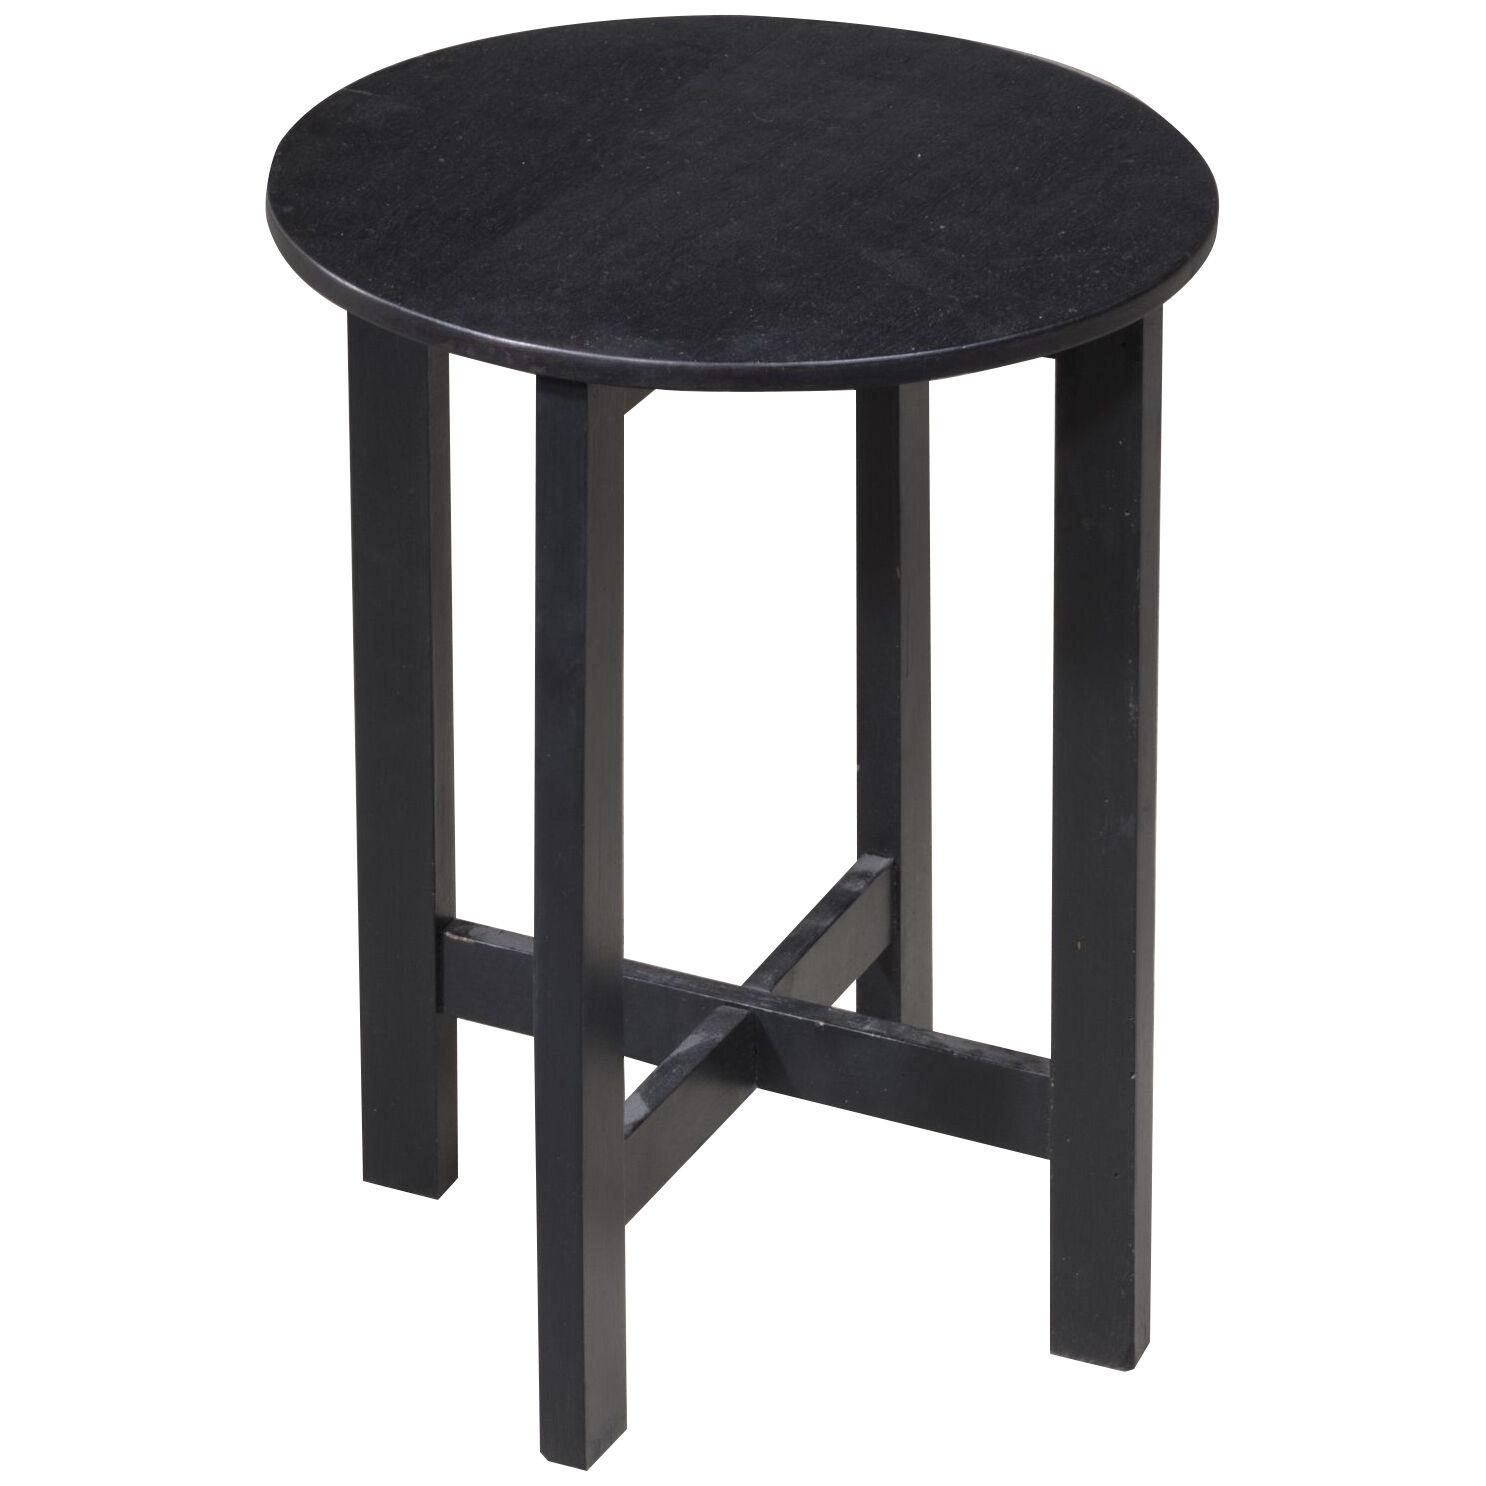 Black Wooden Side Table or Stool, Germany, 1920s